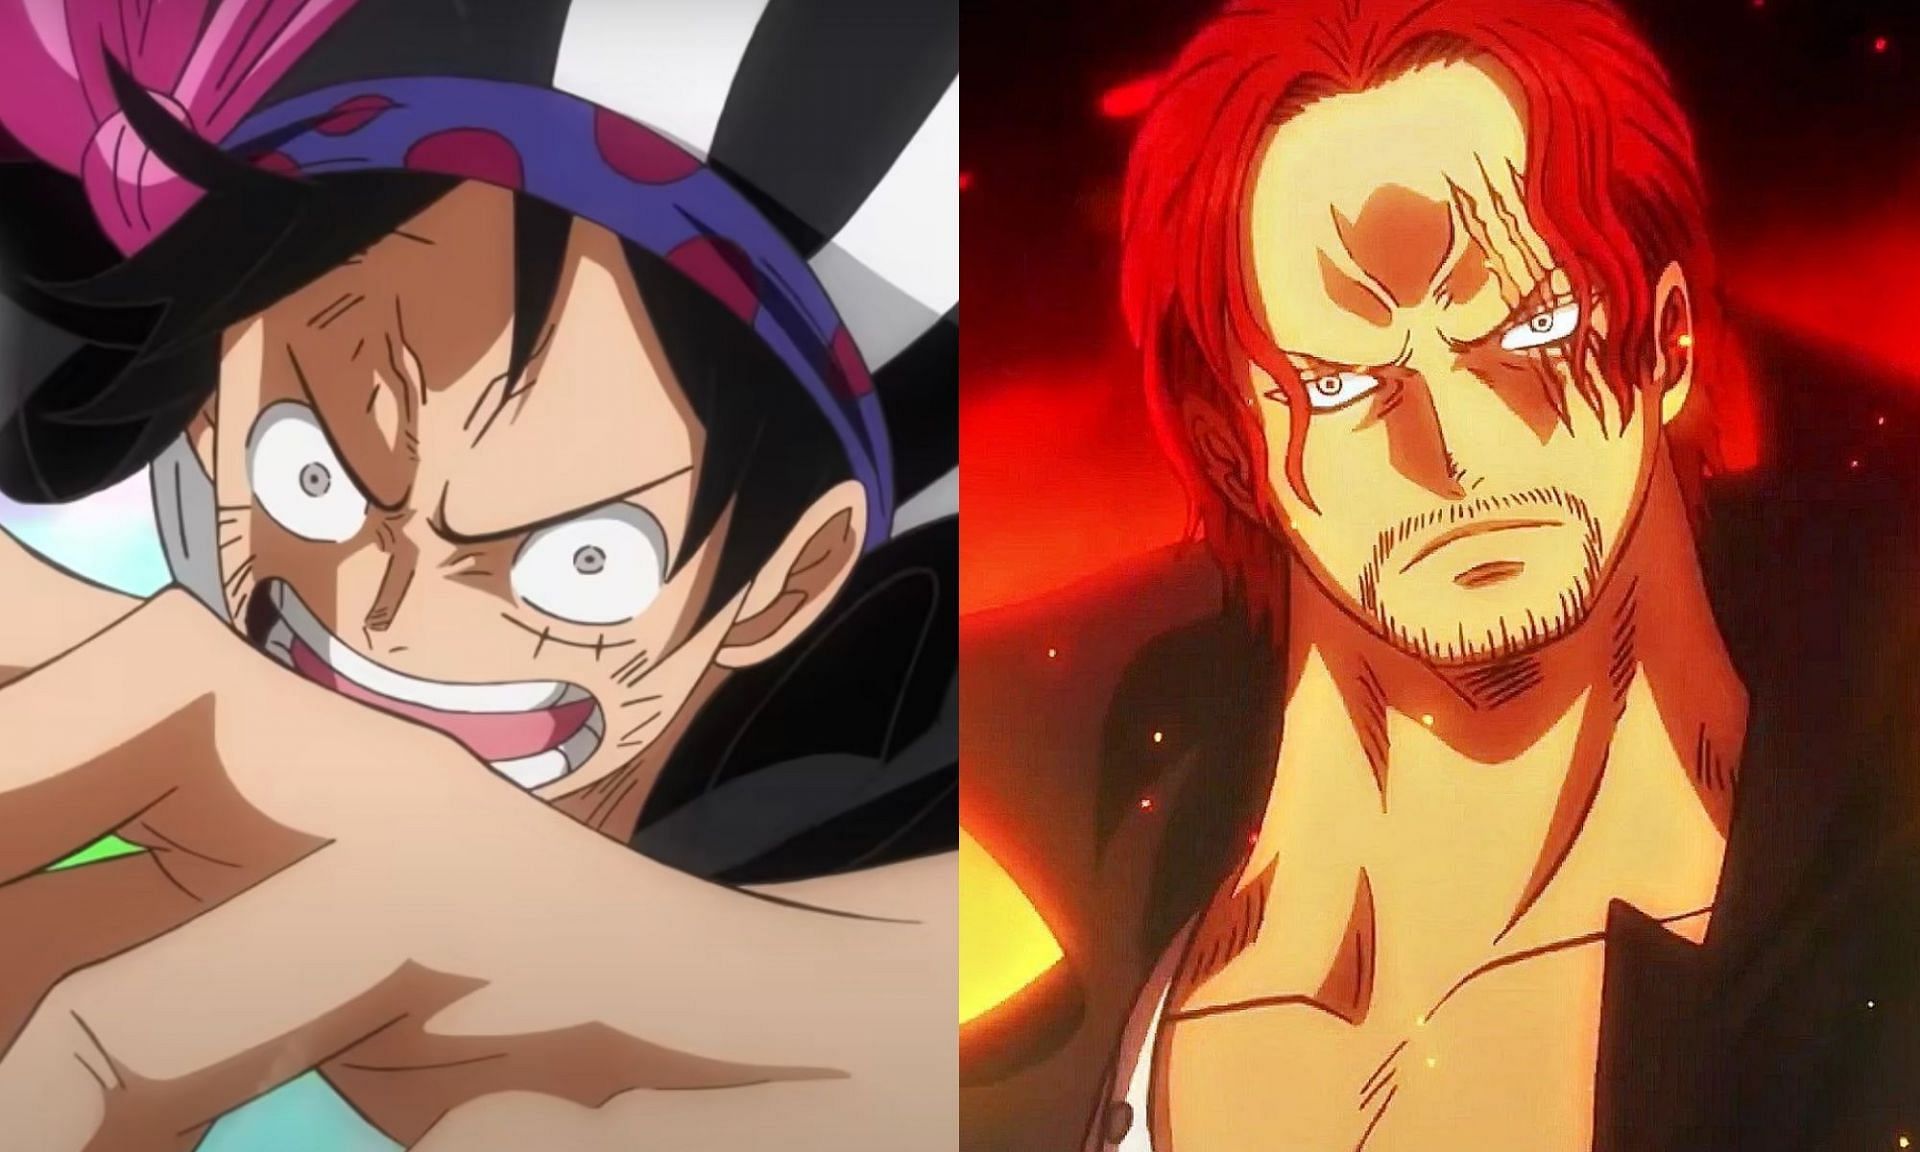 So there's mixed feelings about live action Shanks saving Luffy